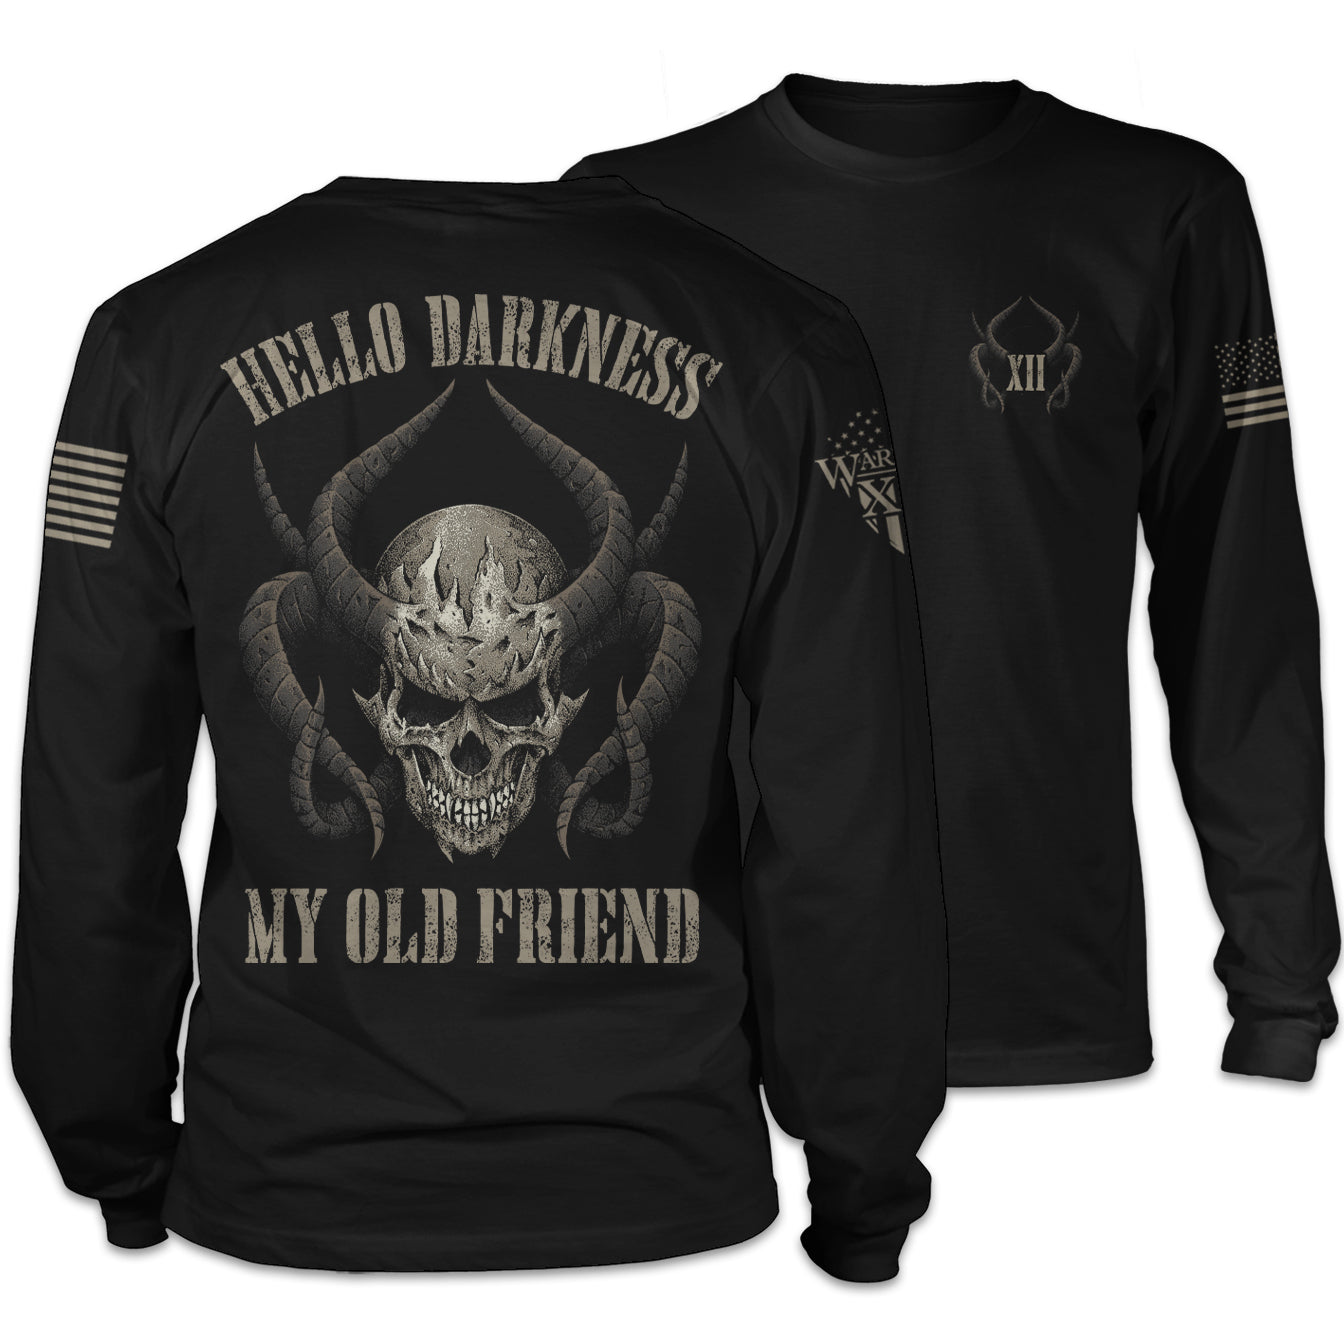 Front & back black long sleeve shirt with the words "Hello darkness my old friend" with a skull and horns printed on the shirt.